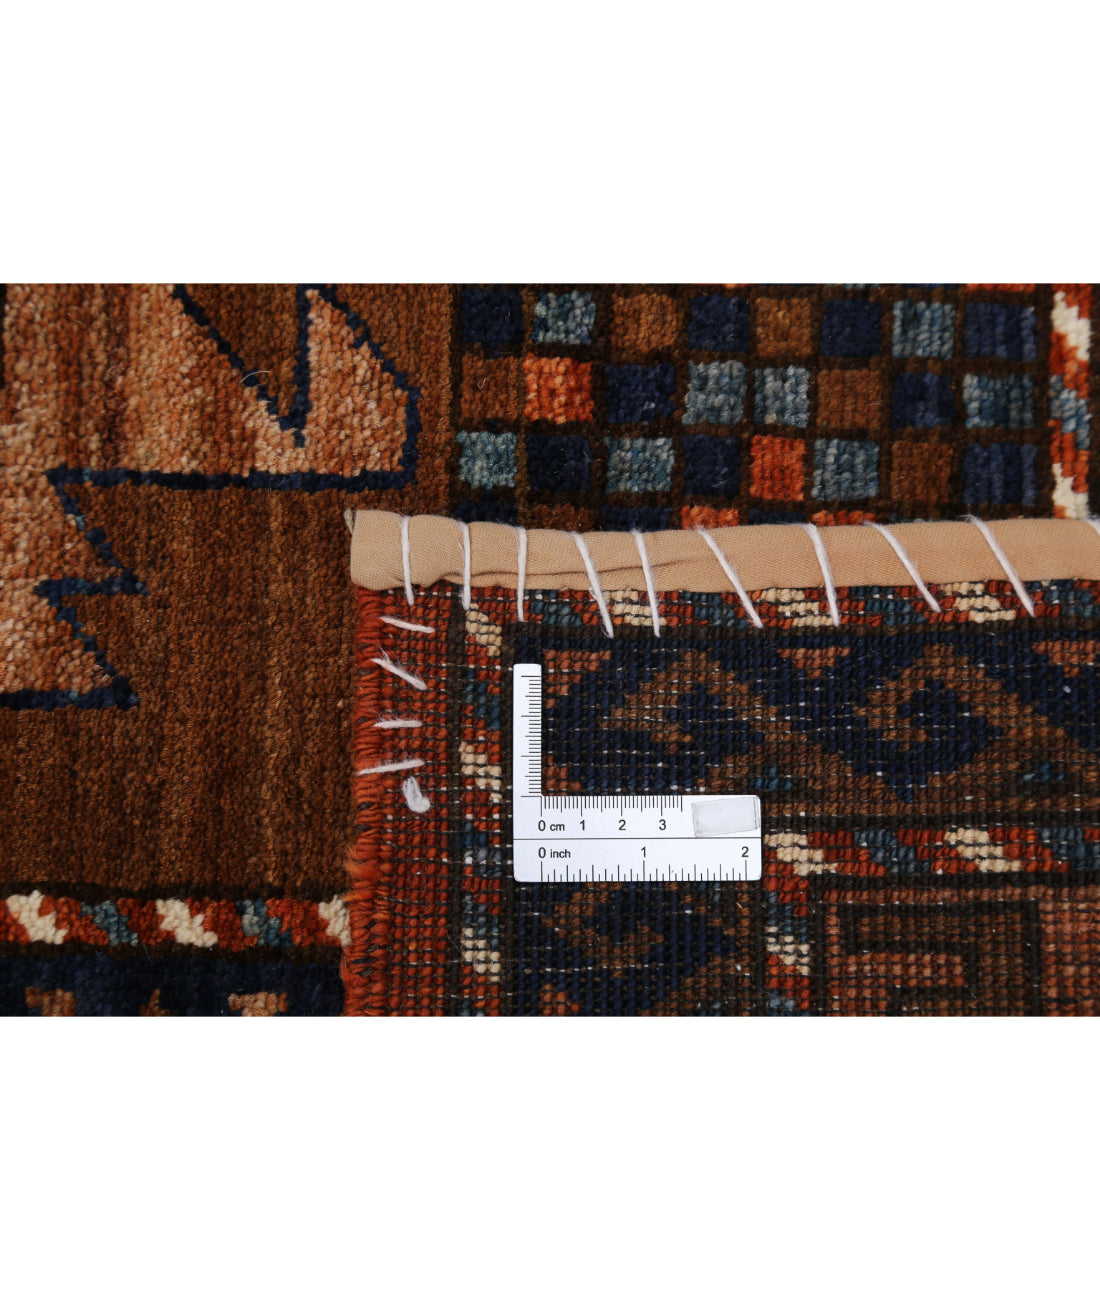 Hand Knotted Nomadic Caucasian Humna Wool Rug - 6'0'' x 8'9'' 6'0'' x 8'9'' (180 X 263) / Rust / Blue